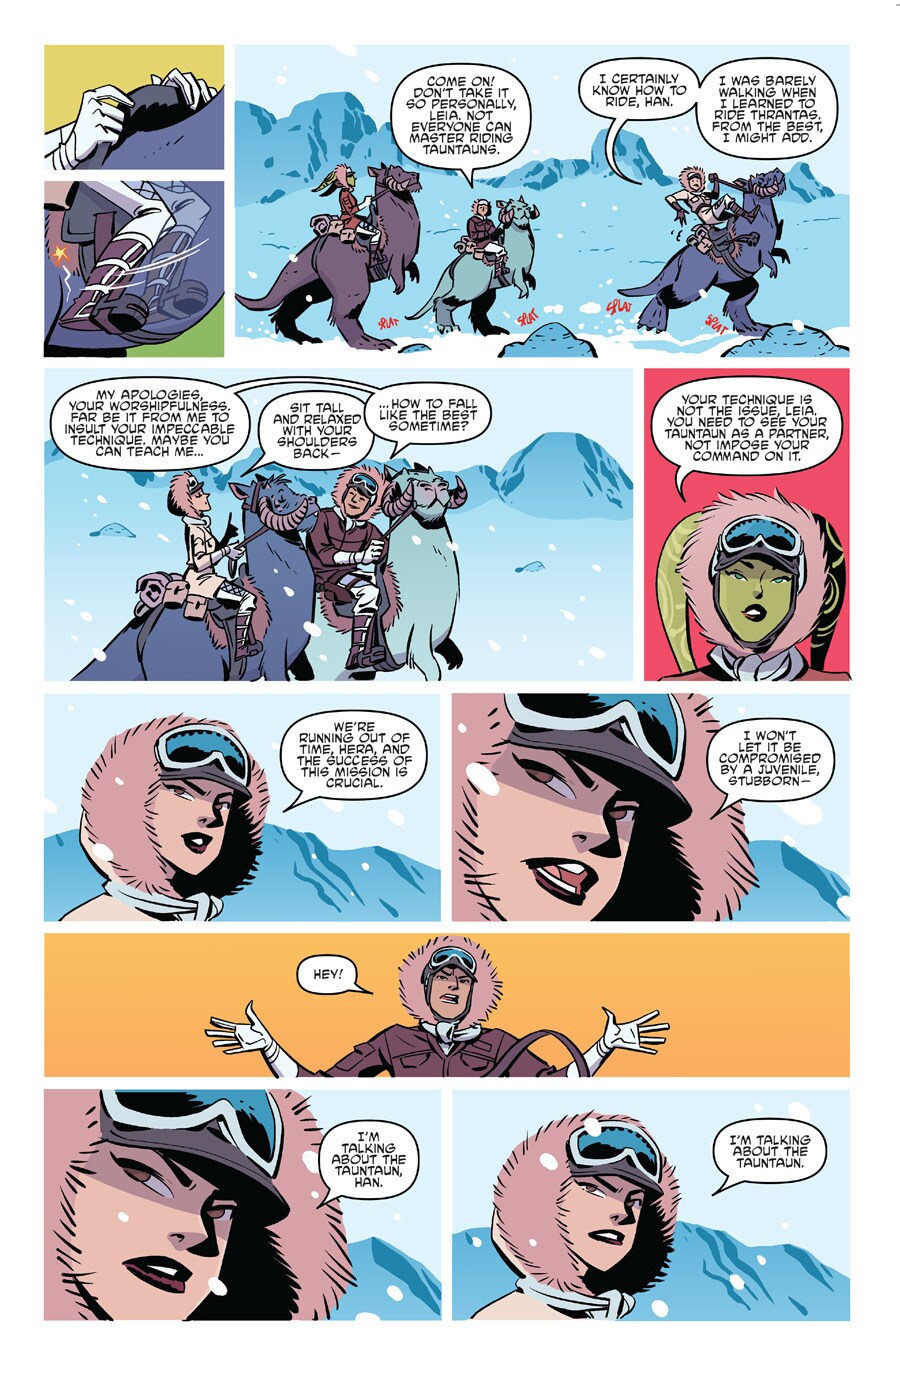 Princess Leia rides a Taunton on Hoth with Han Solo in a page from the comic book Star Wars Forces of Destiny: Leia.